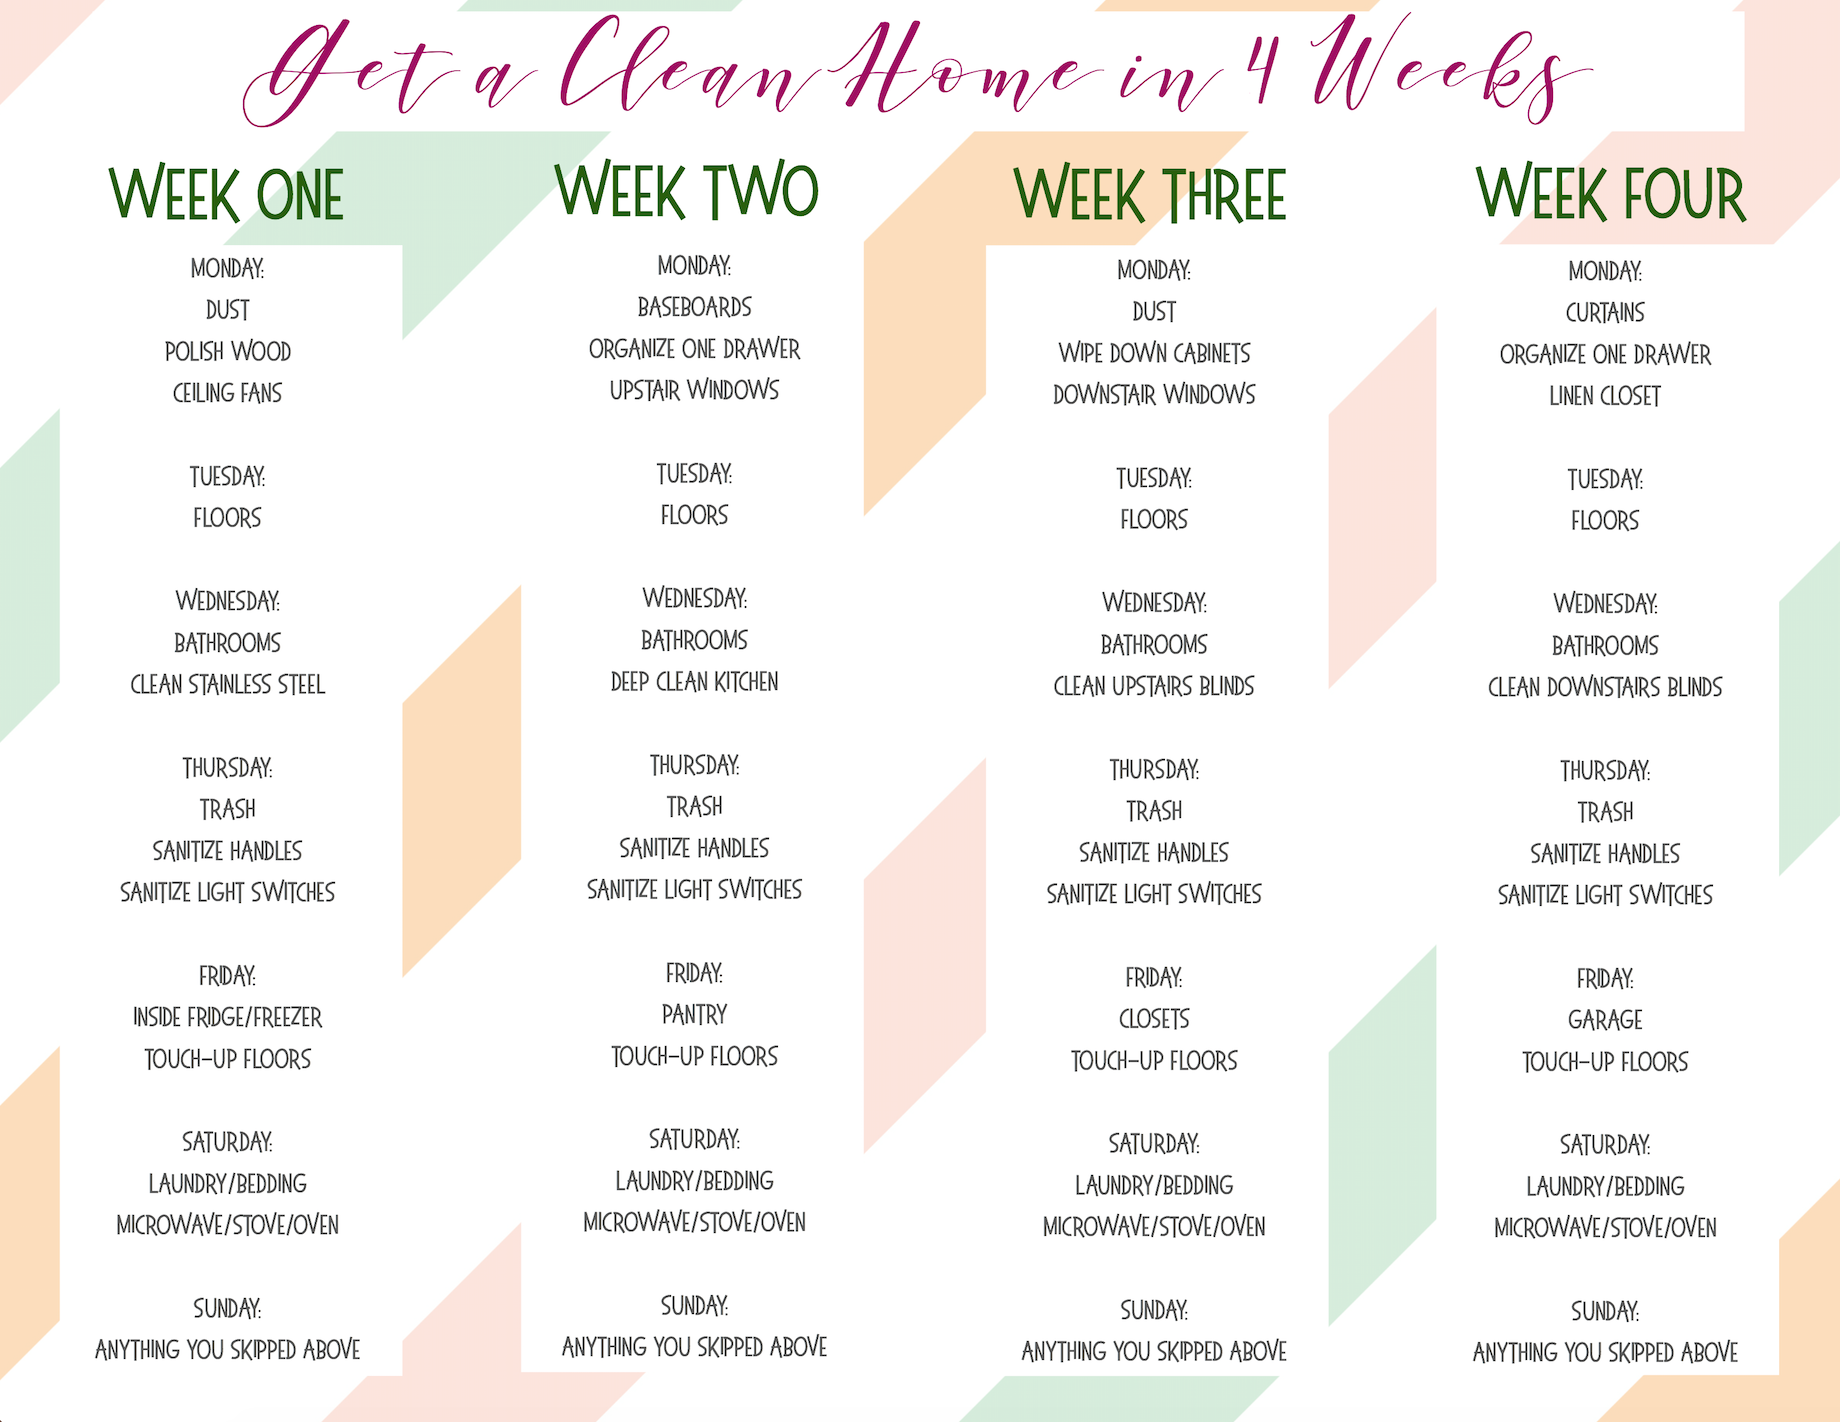 Is your home a wreck? Mine was too. Until I said enough is enough and created this Clean Home in 4 Weeks printable. Now my home is clean, and I'm sane.